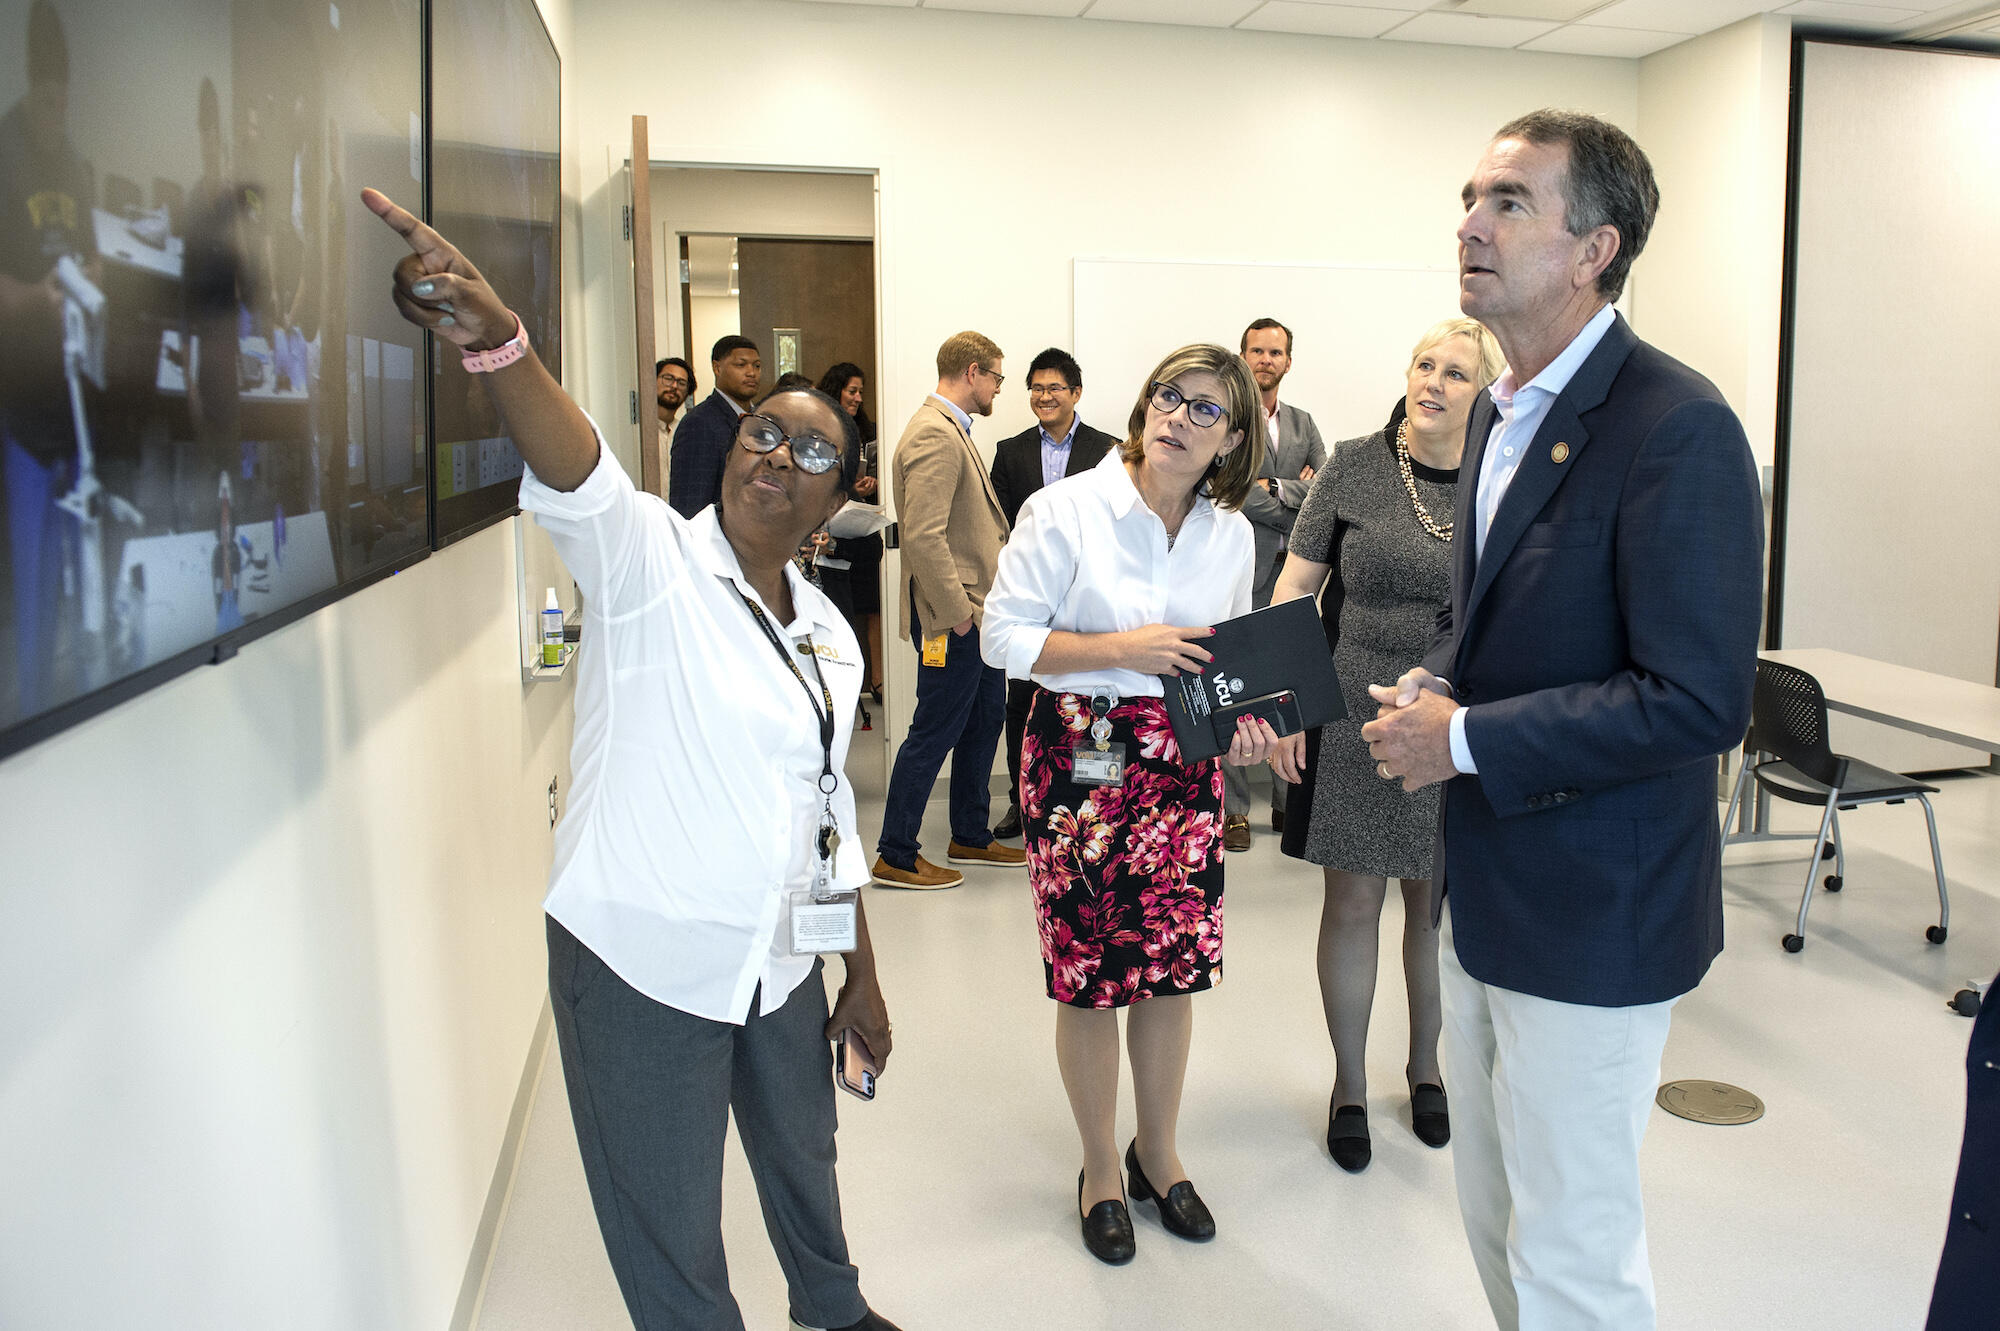 (From left) Beverly George-Gay, DNP, associate professor in the Department of Nurse Anesthesia, points to a screen showing the VCU College of Health Professions' two-way synchronous video conferencing capabilities as Nickie Damico, Ph.D., the department's chair, Susan Parish, Ph.D., dean of the college and Virginia Gov. Ralph Northam, M.D., look on.